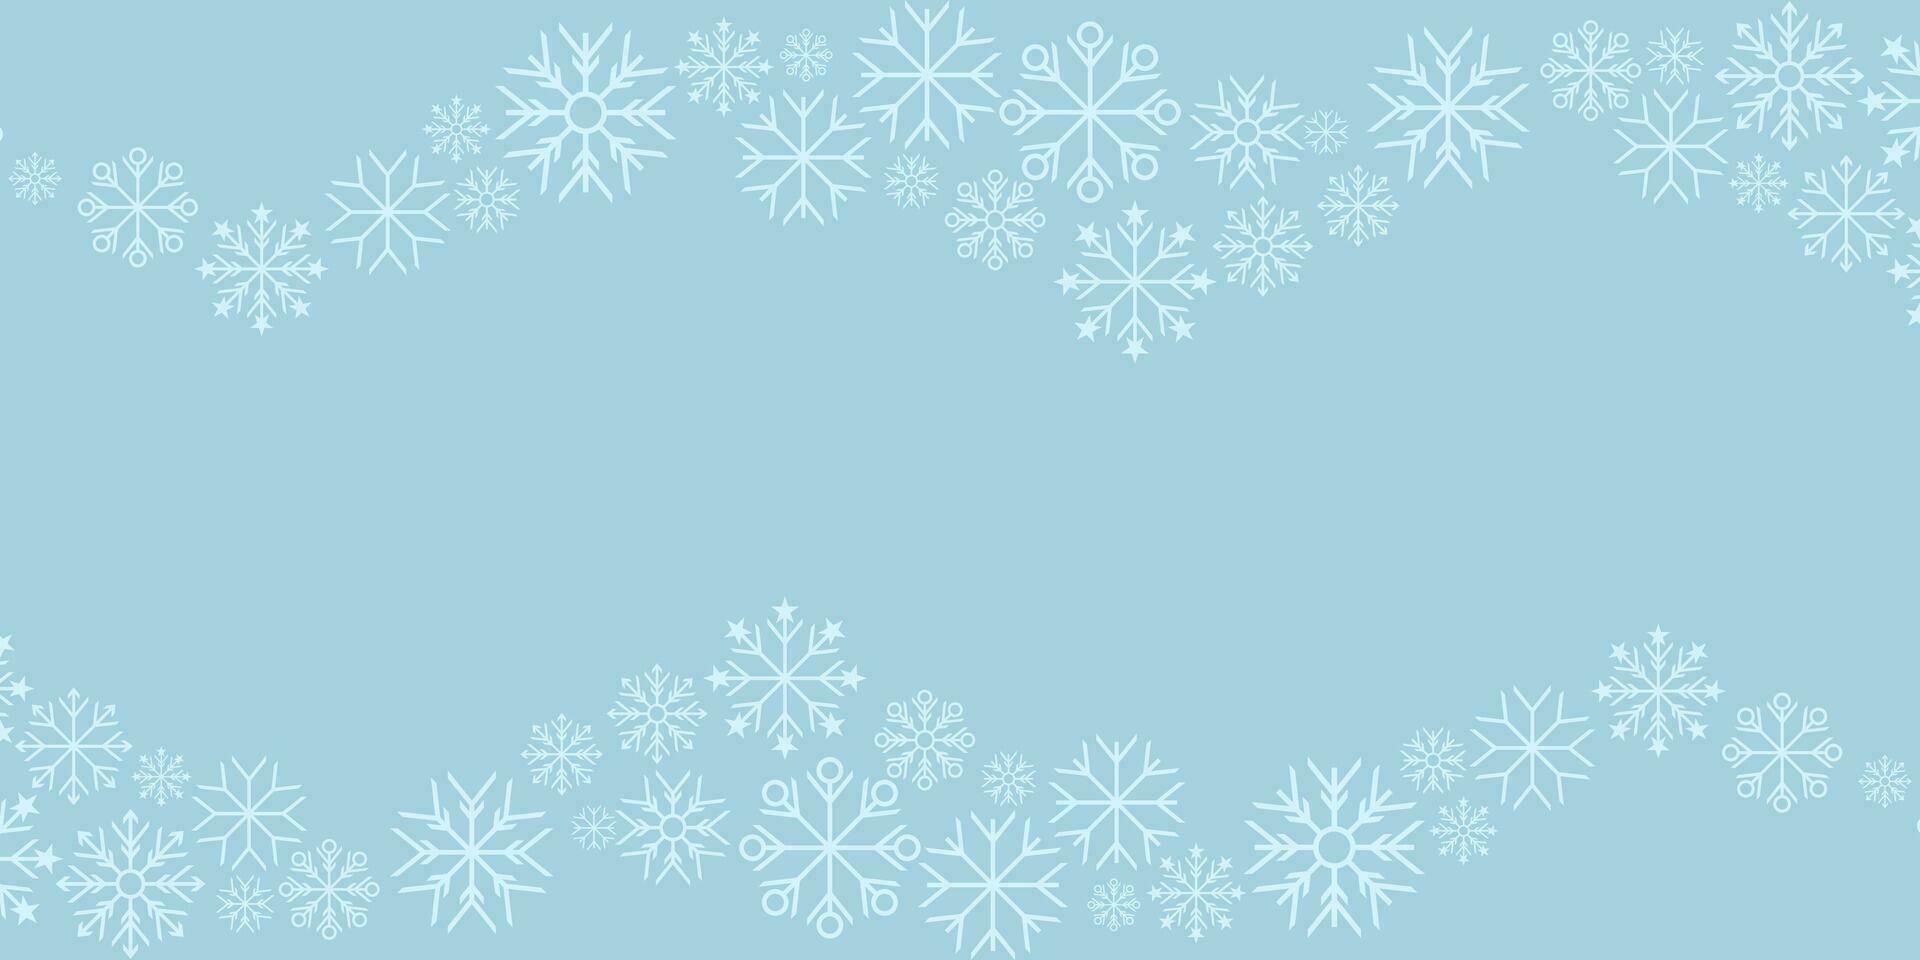 blue Christmas background with snow icon decoration. design free copy space area. vector for banner, poster, greeting card, social media.